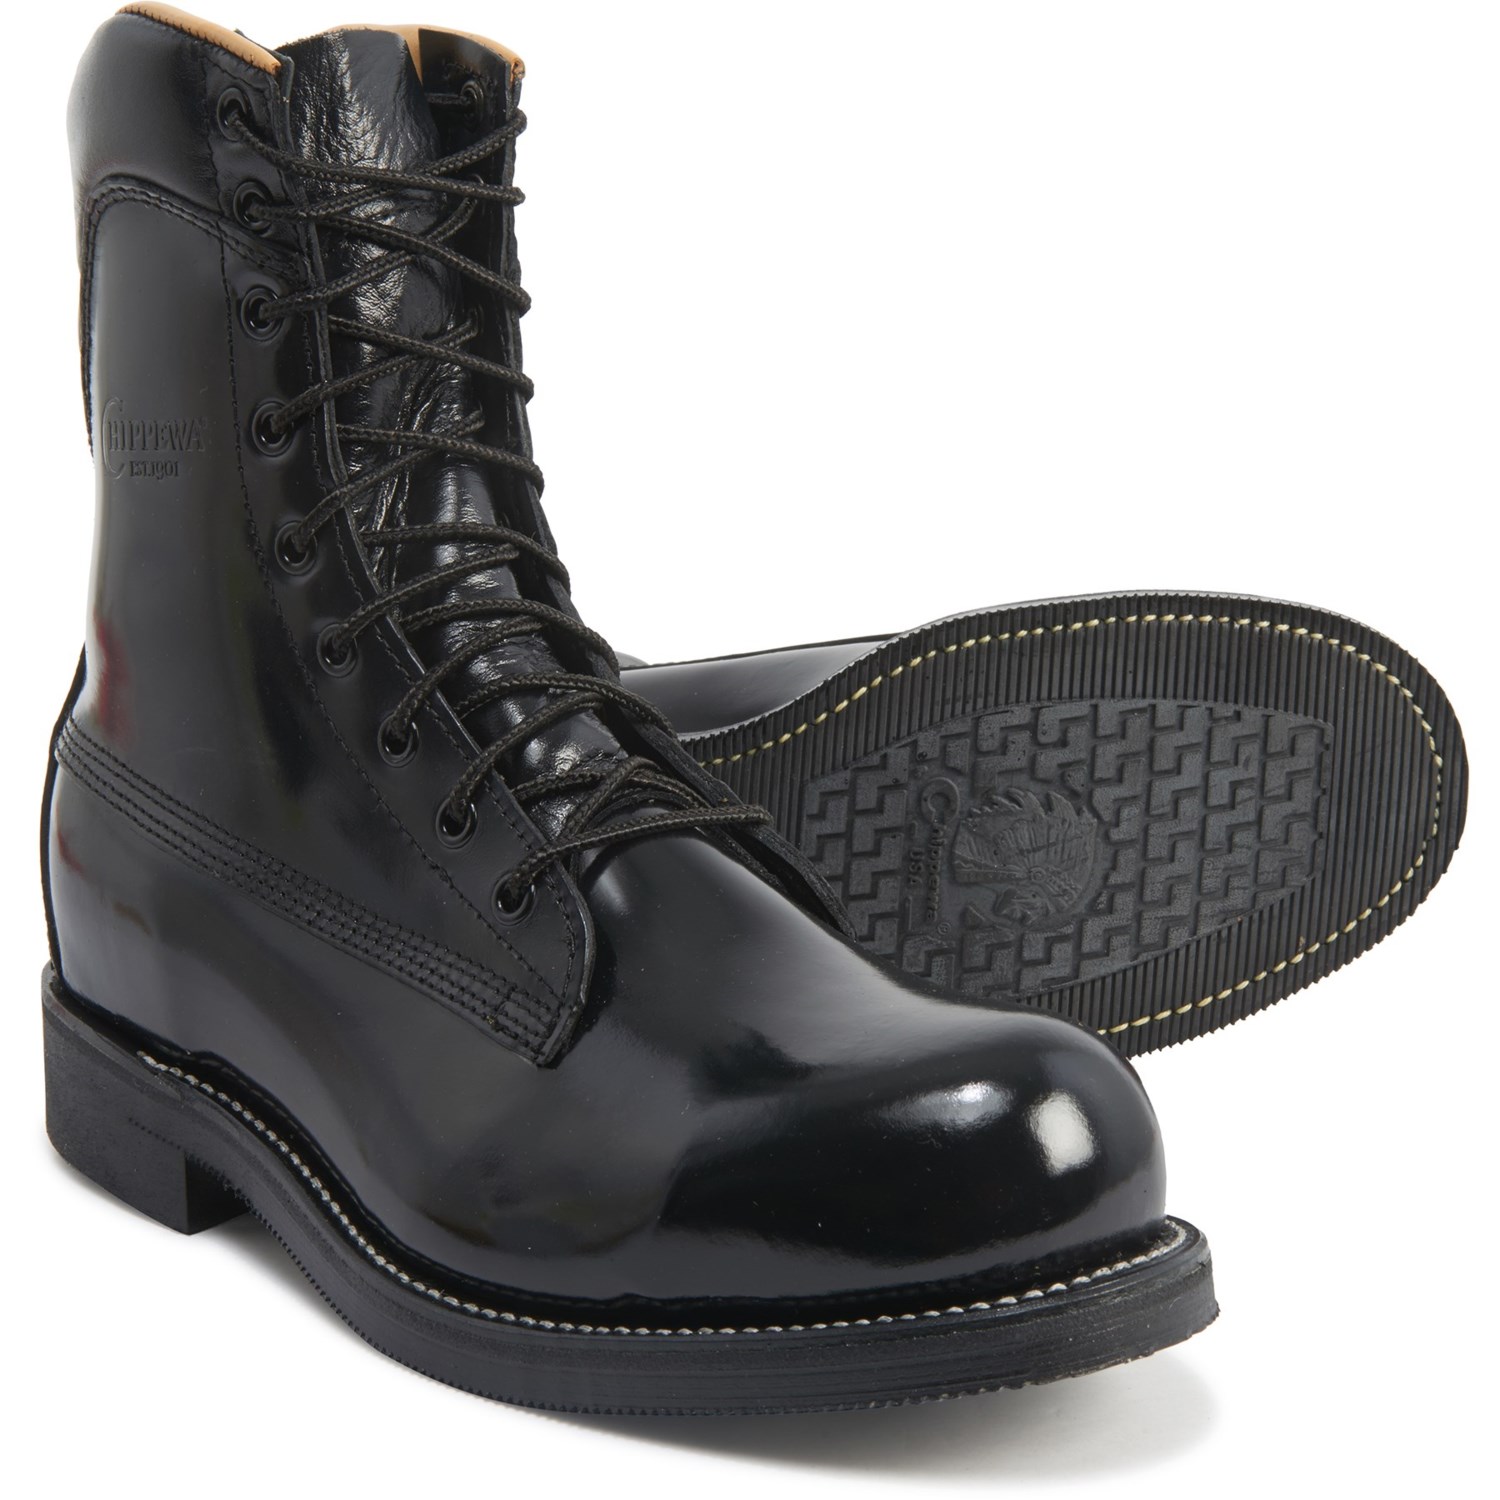 work boots tactical